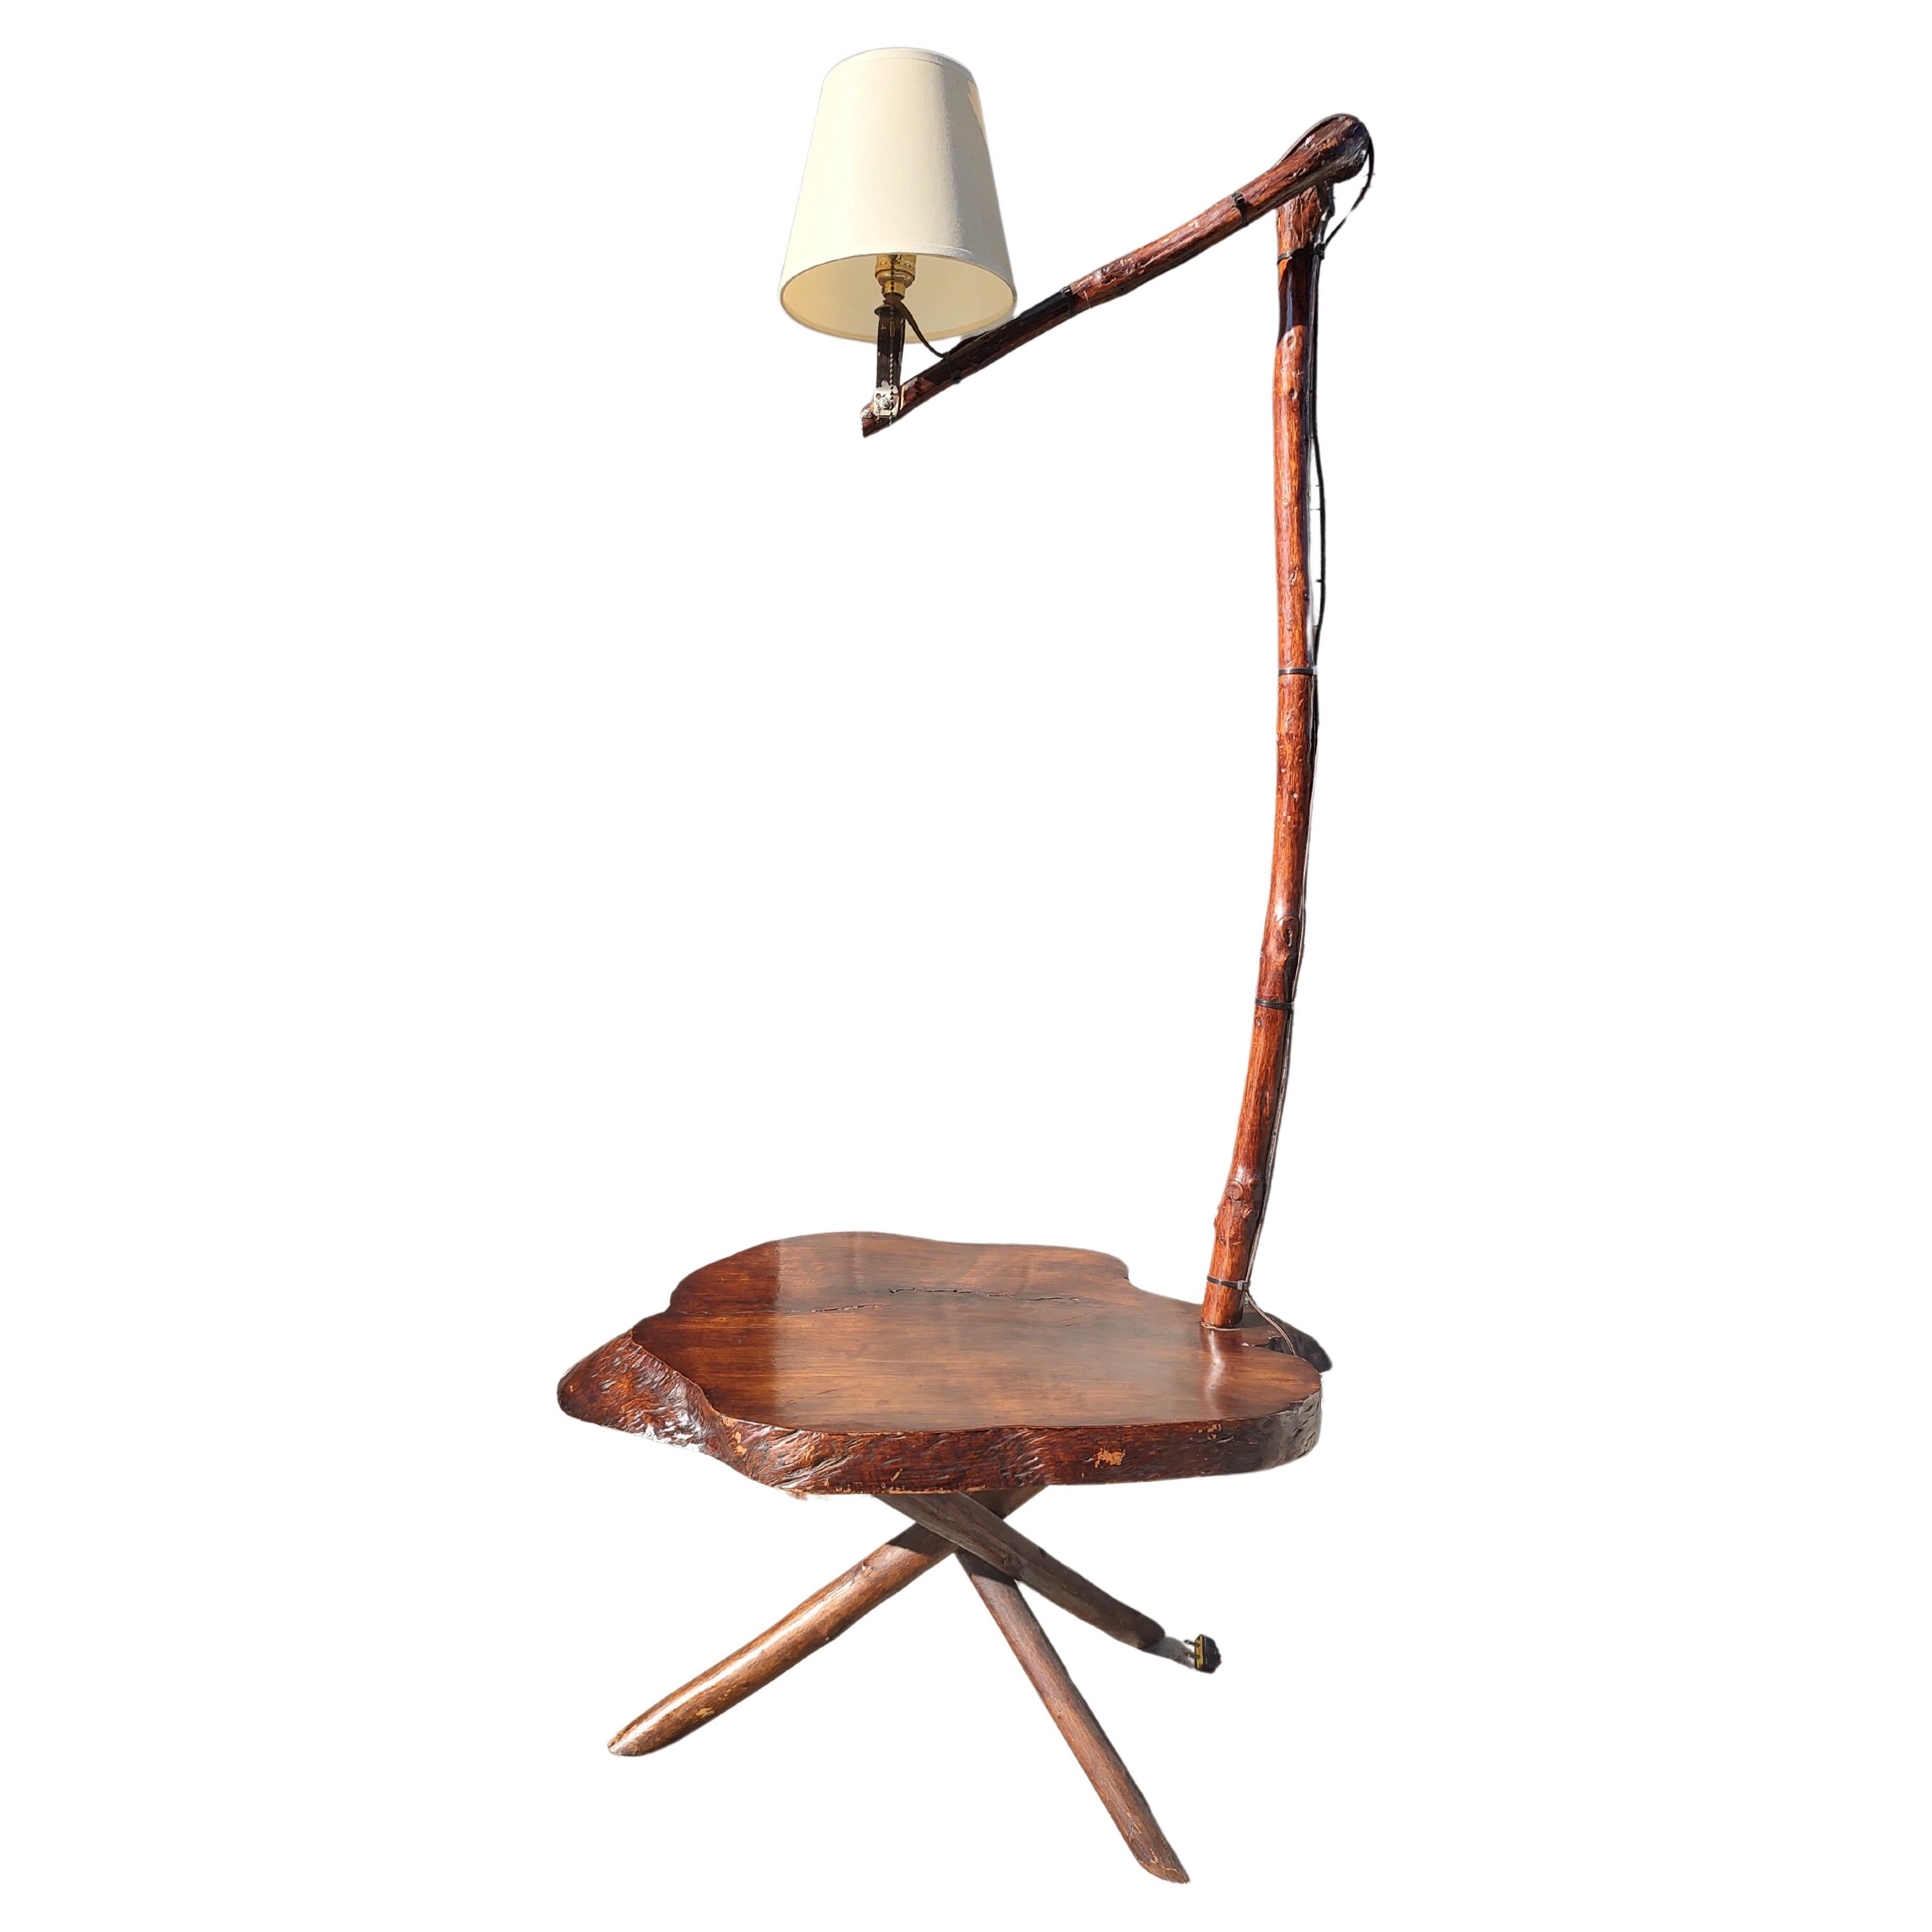 Adirondack Bent Twig Floor Lamp with Tri Leg Table Base For Sale